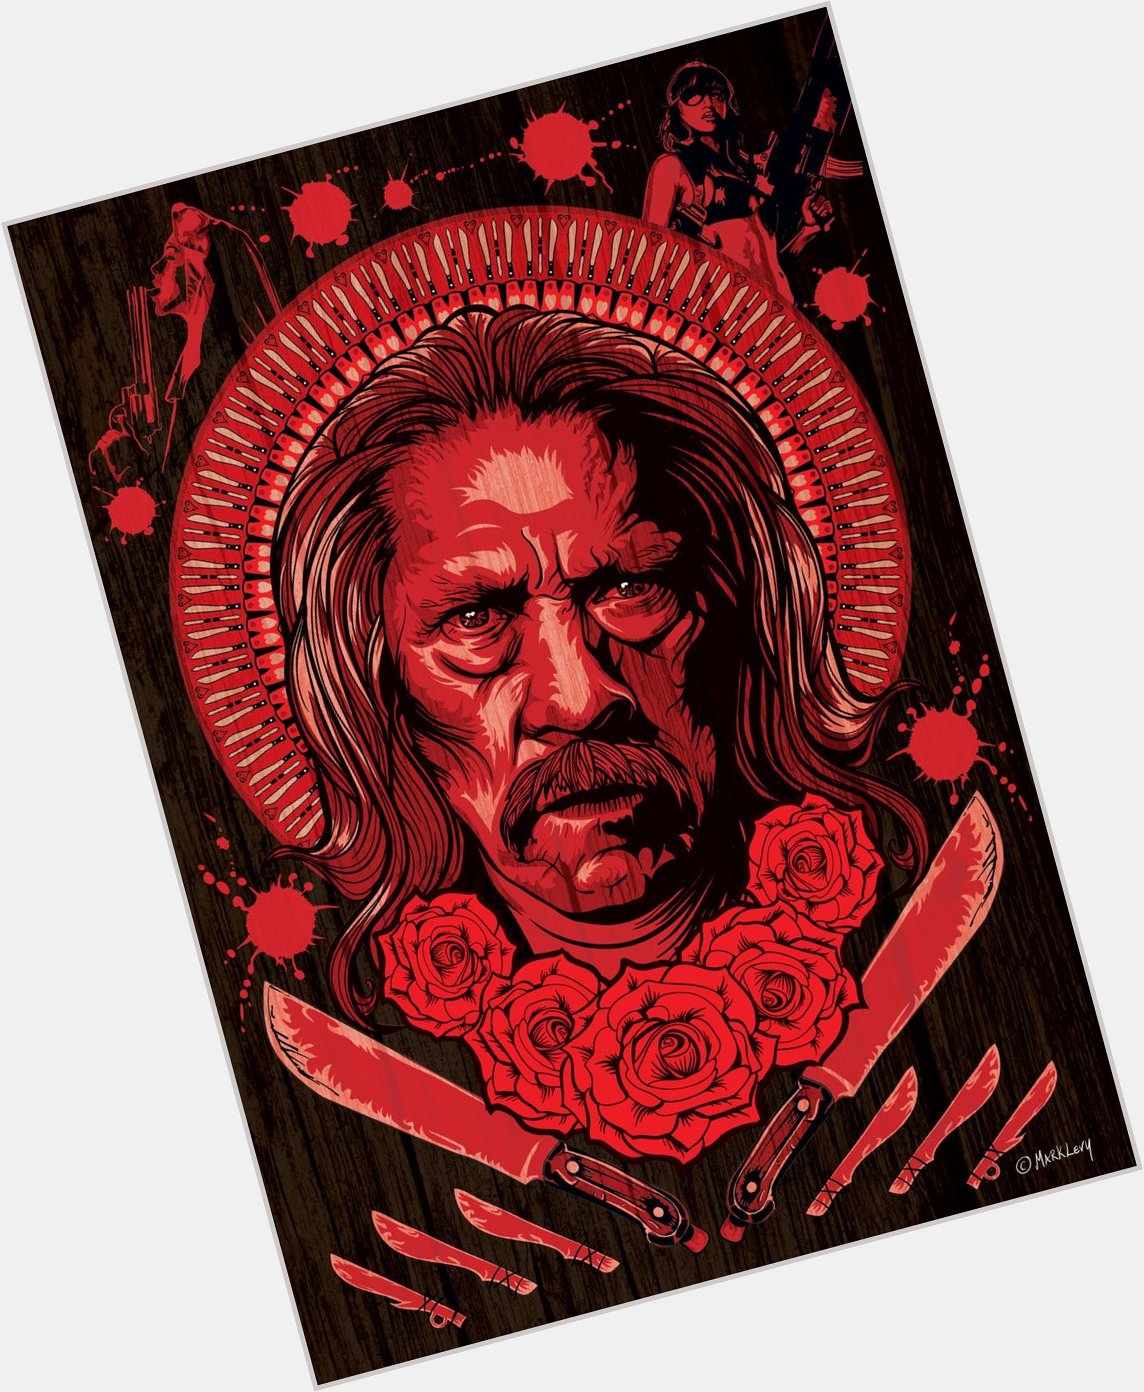 Happy Birthday Danny Trejo, who s 77 today!!!
Here s an old poster I did for Machete a while back. 